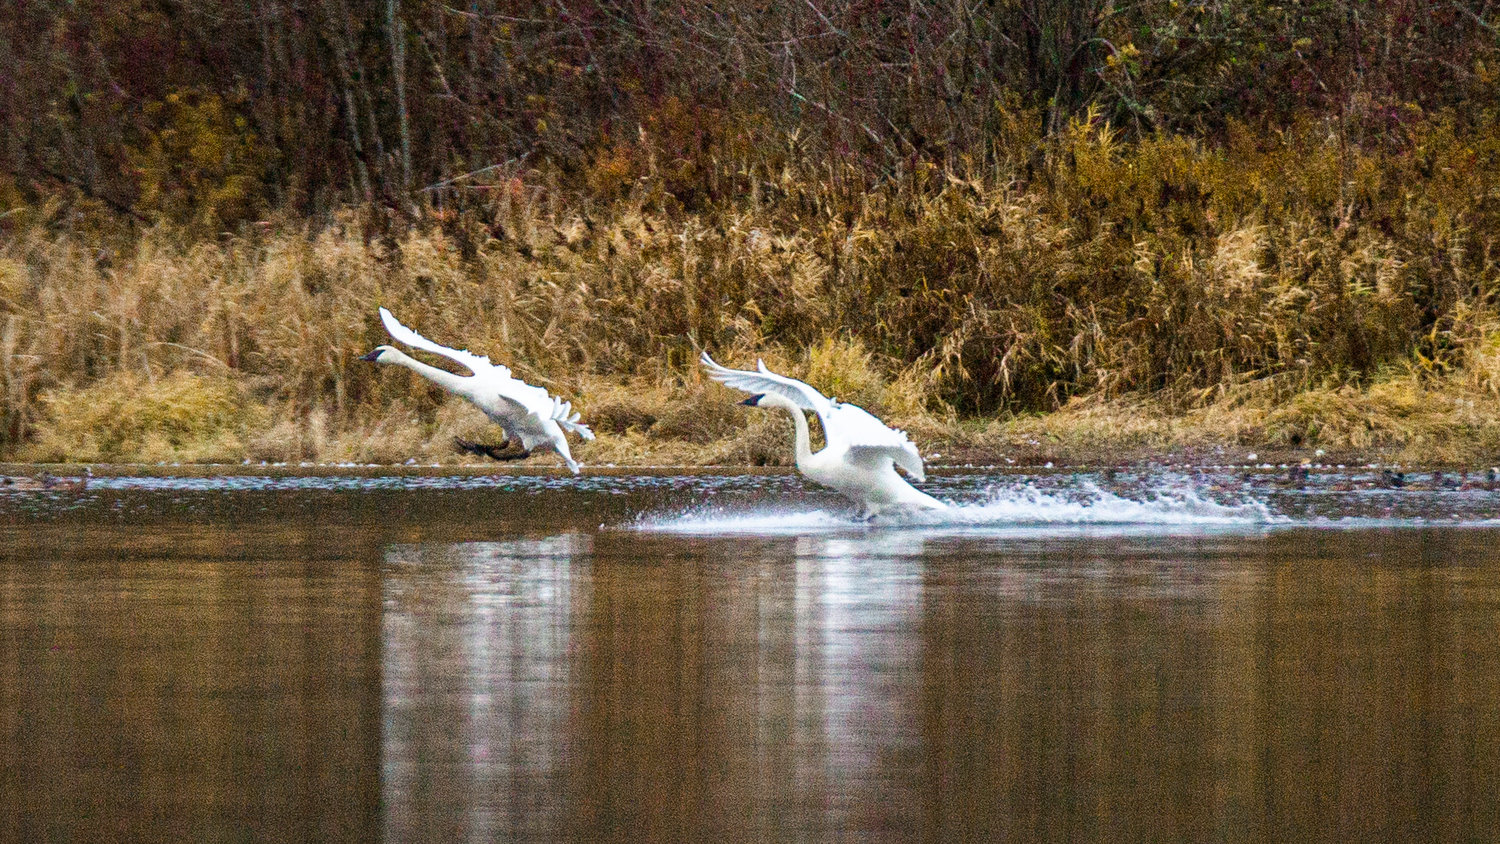 Swans make a splash landing on a pond at the trailhead of the Willapa Hills Trail in Chehalis Saturday.